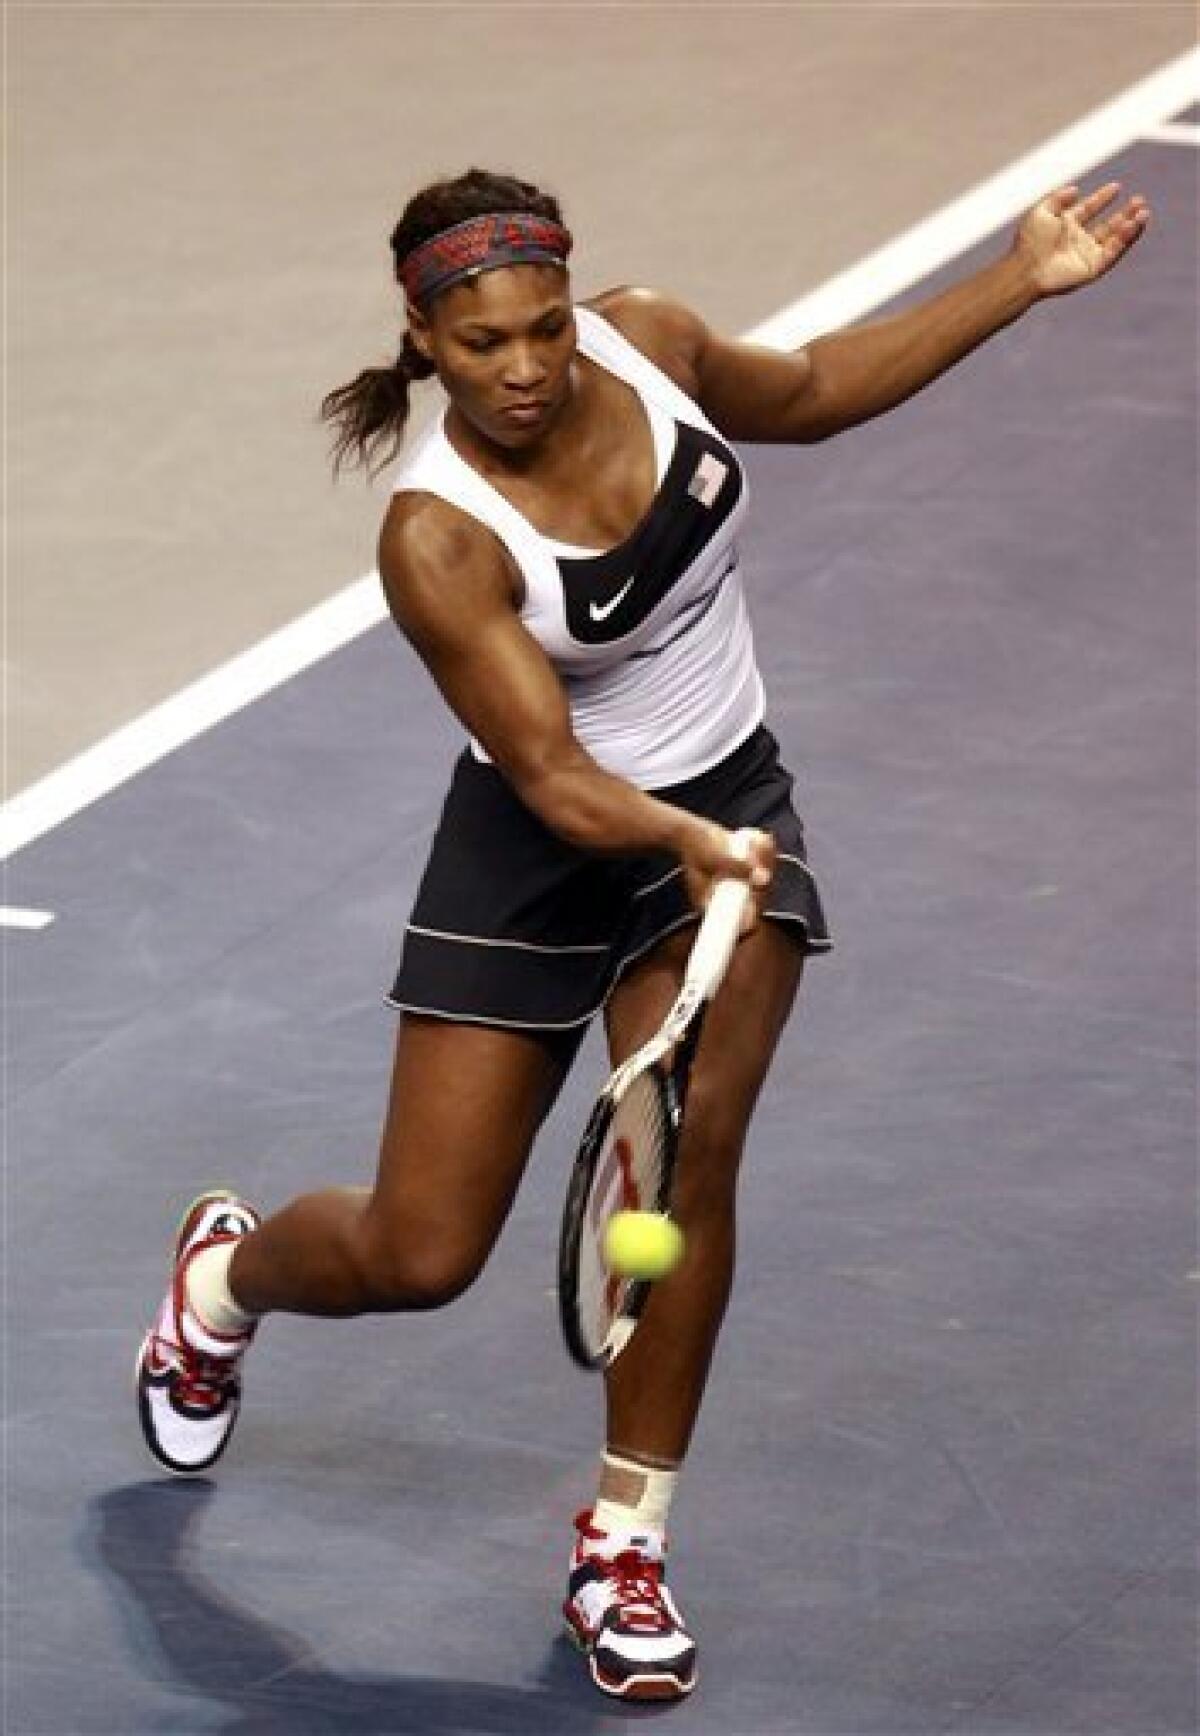 Serena Williams returns a ball to Anastasia Yakimova, of Belarus, during a first-round Fed Cup tennis match in Worcester, Mass., Sunday, Feb. 5, 2012. (AP Photo/Steven Senne)